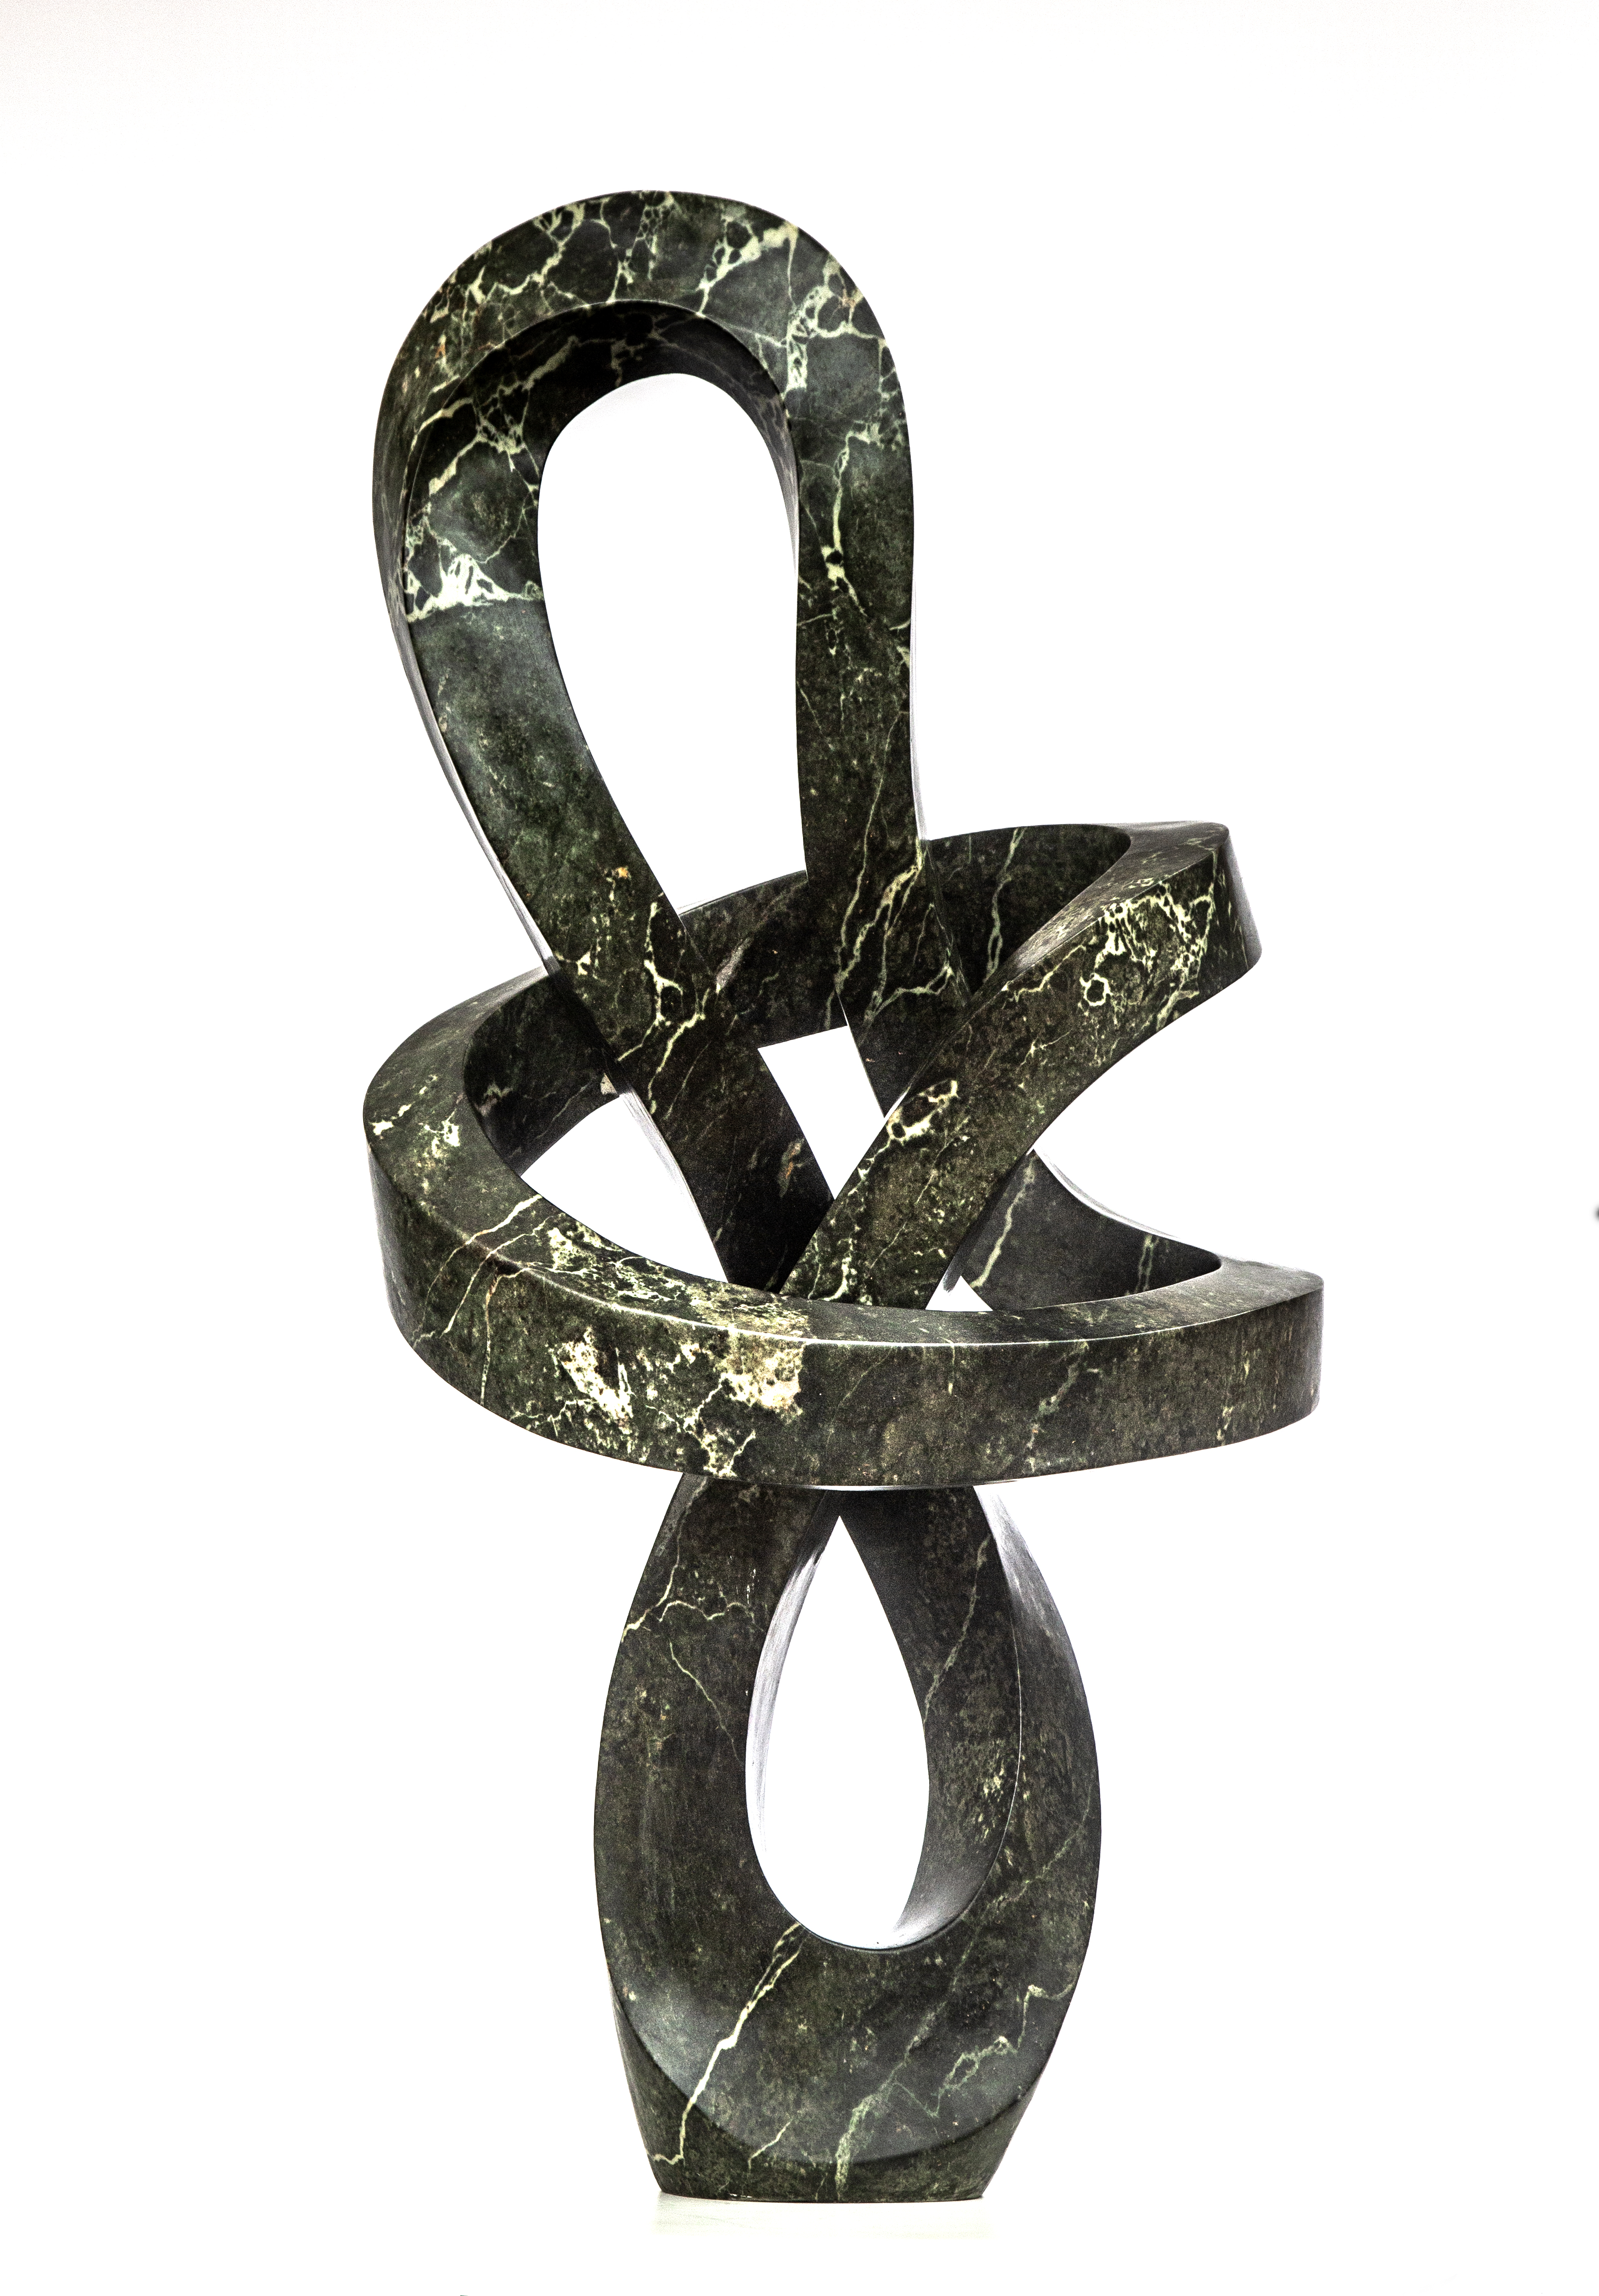 Modern Sculpture: Victor Matafi Healing Thoughts Opalstone Signed 102cm high by 52cm wide by 28cm